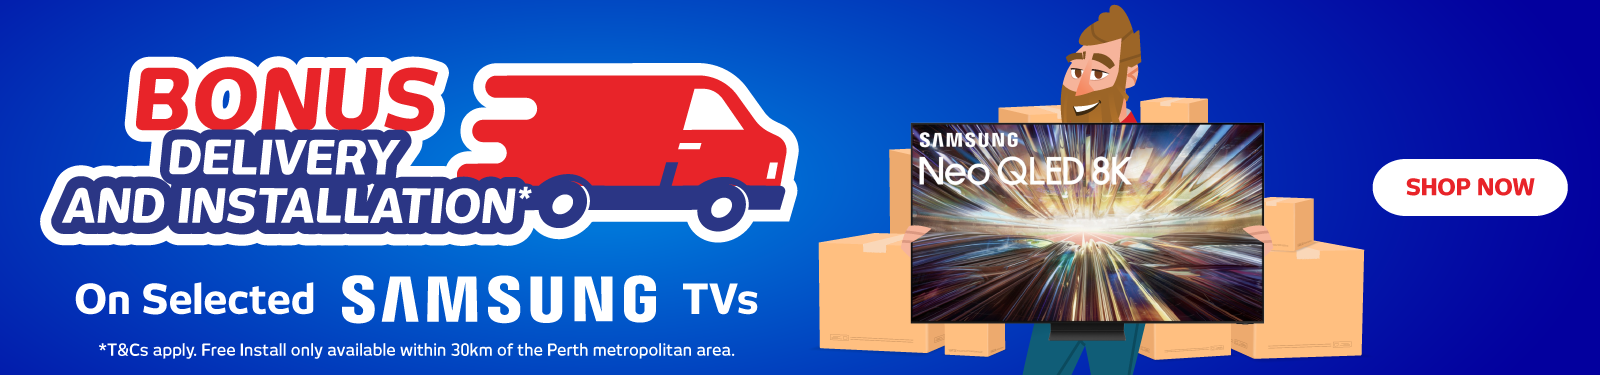 Bonus Delivery and Installation On Selected Samsung TVs at Retravision